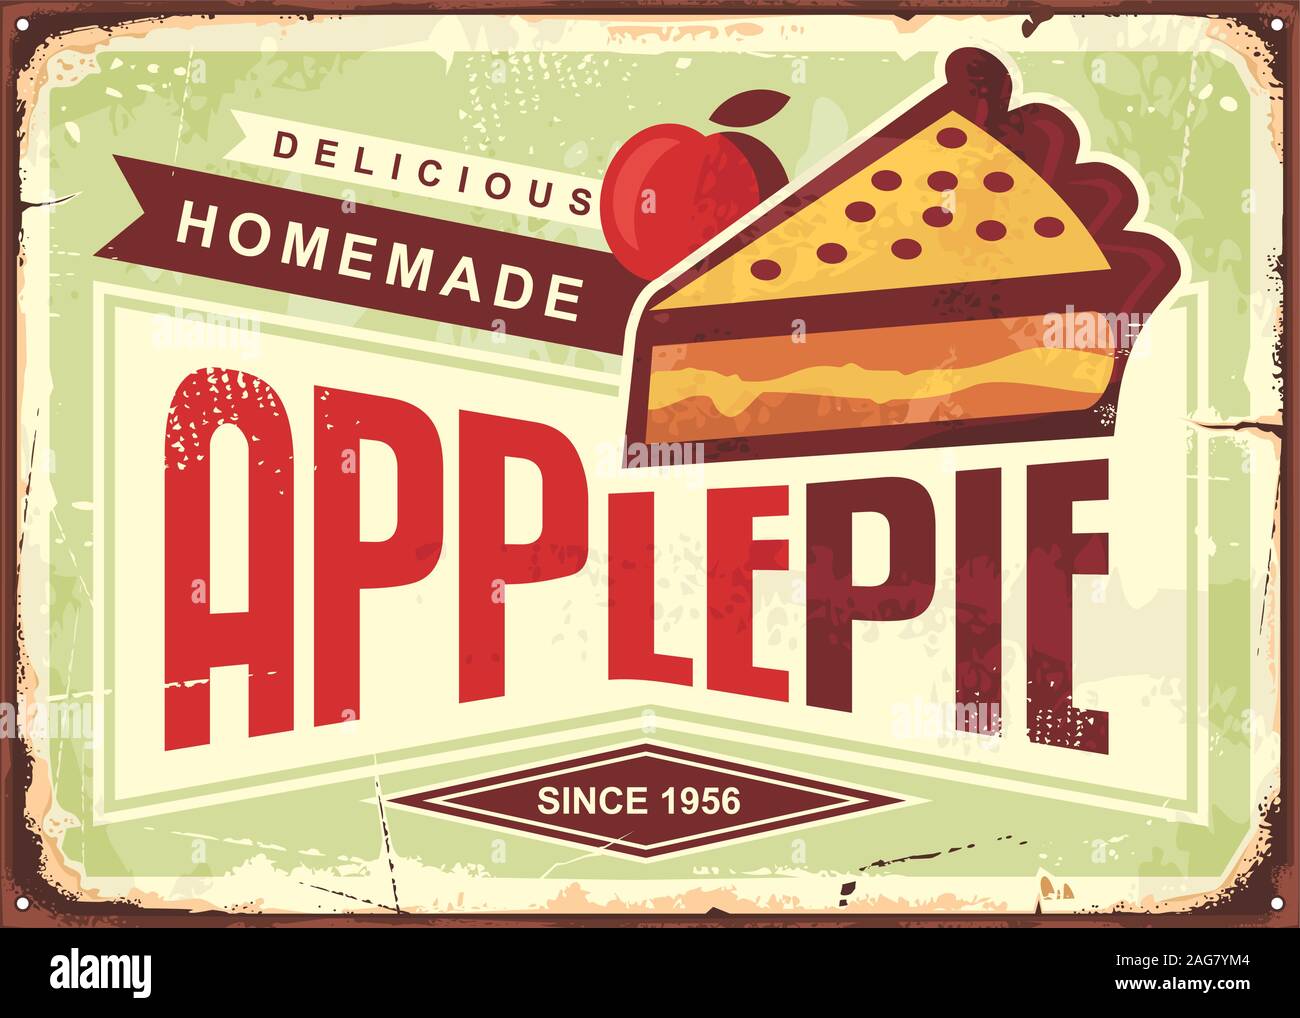 Delicious homemade apple pie retro promotional advertising sign. Vintage bakery poster. Stock Vector